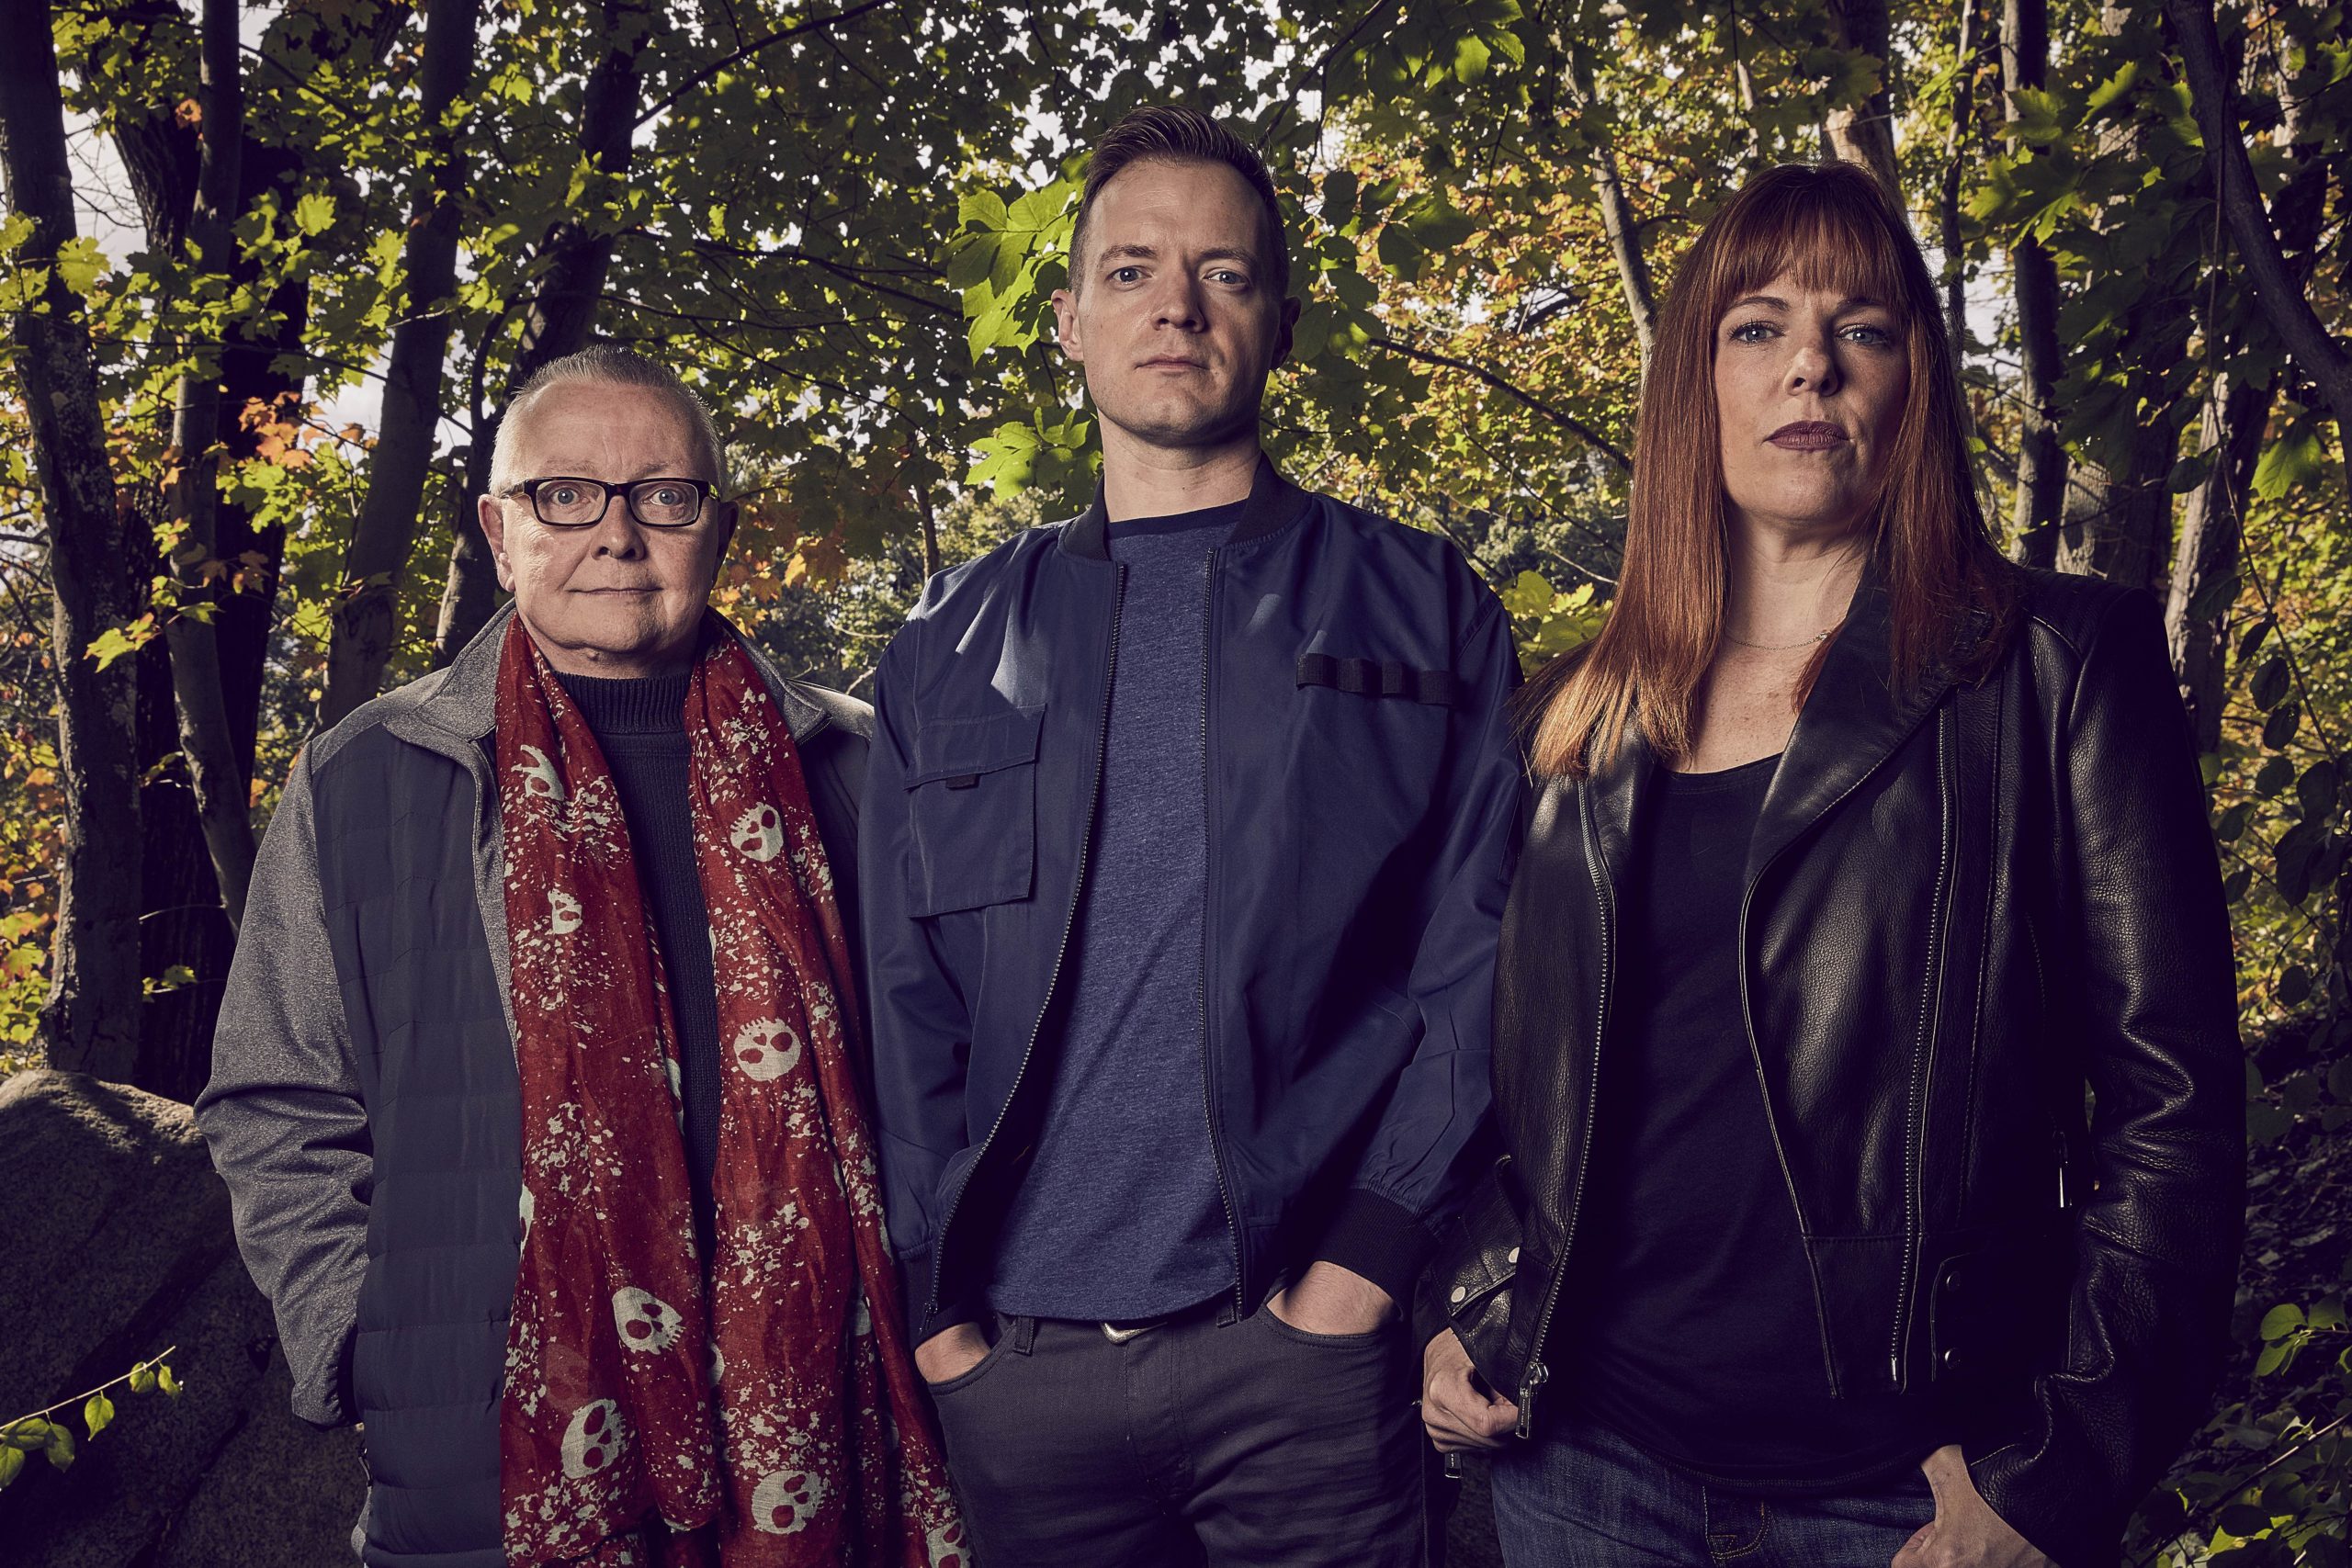 #Kindred Spirits: Season Seven; Paranormal Series Returns to Travel Channel